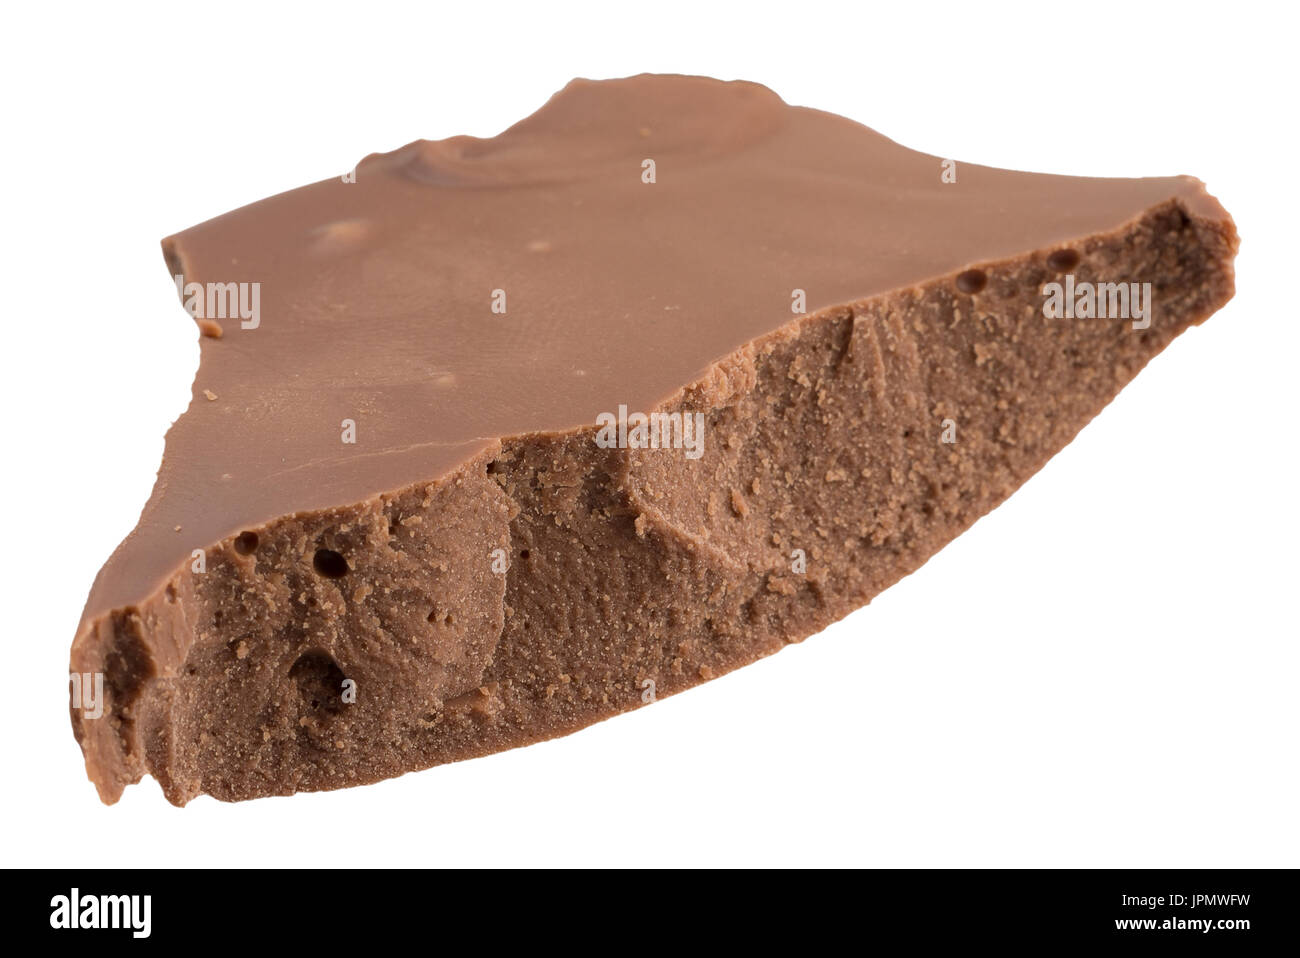 milk chocolate piece isolated on a white background. Stock Photo